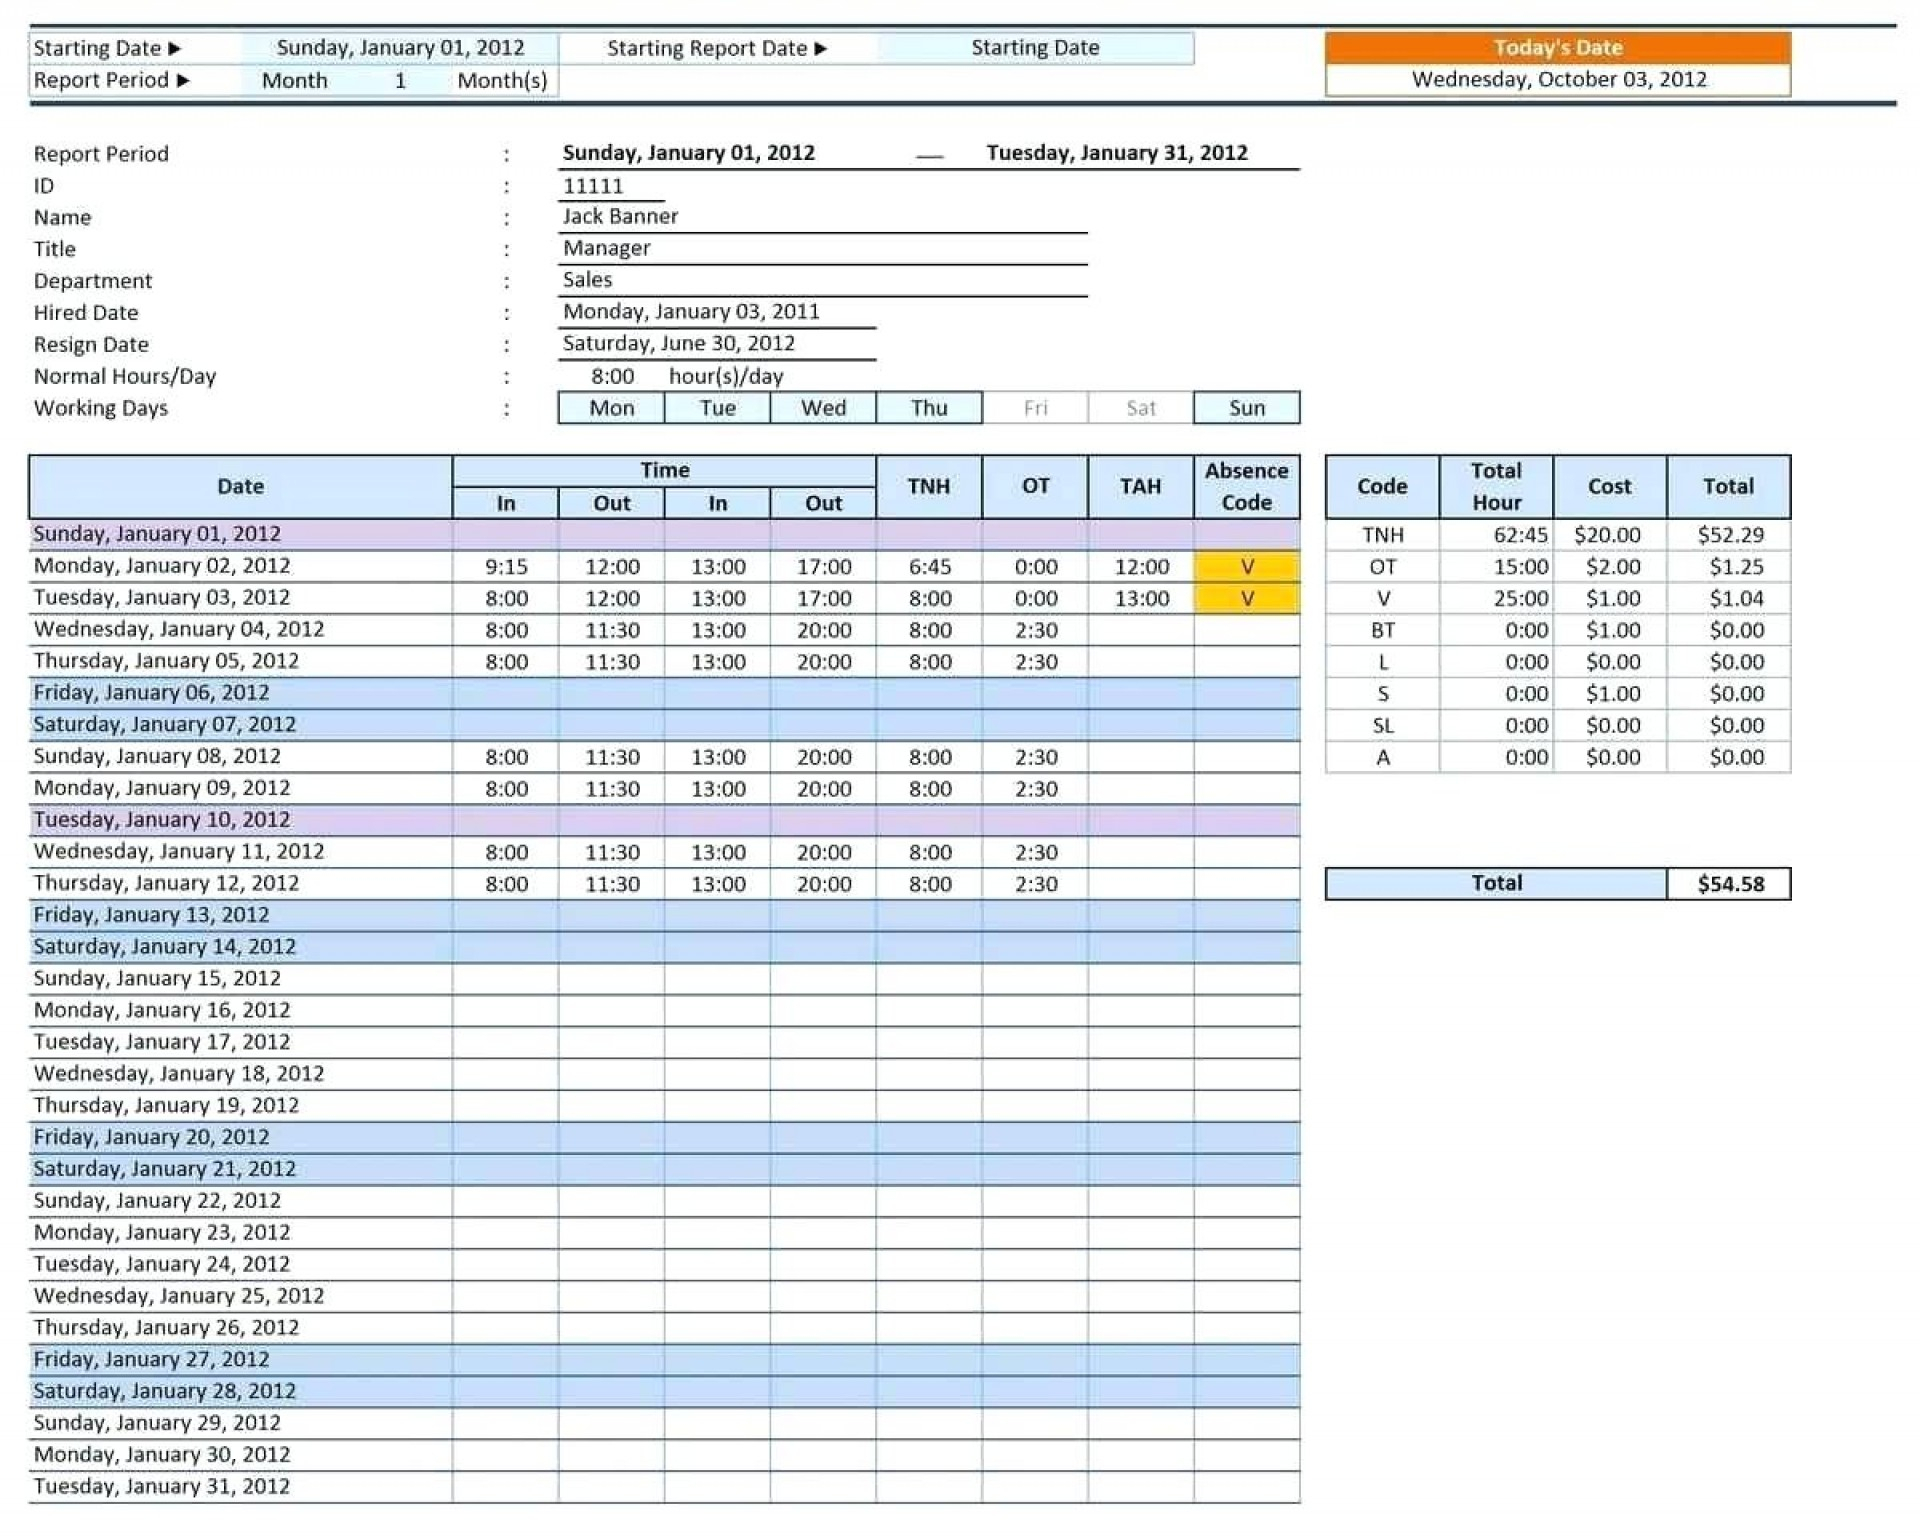 Long Service Leave Calculation Spreadsheet Regarding 004 Employee Vacation Planner Template Excel As Well Spreadsheet